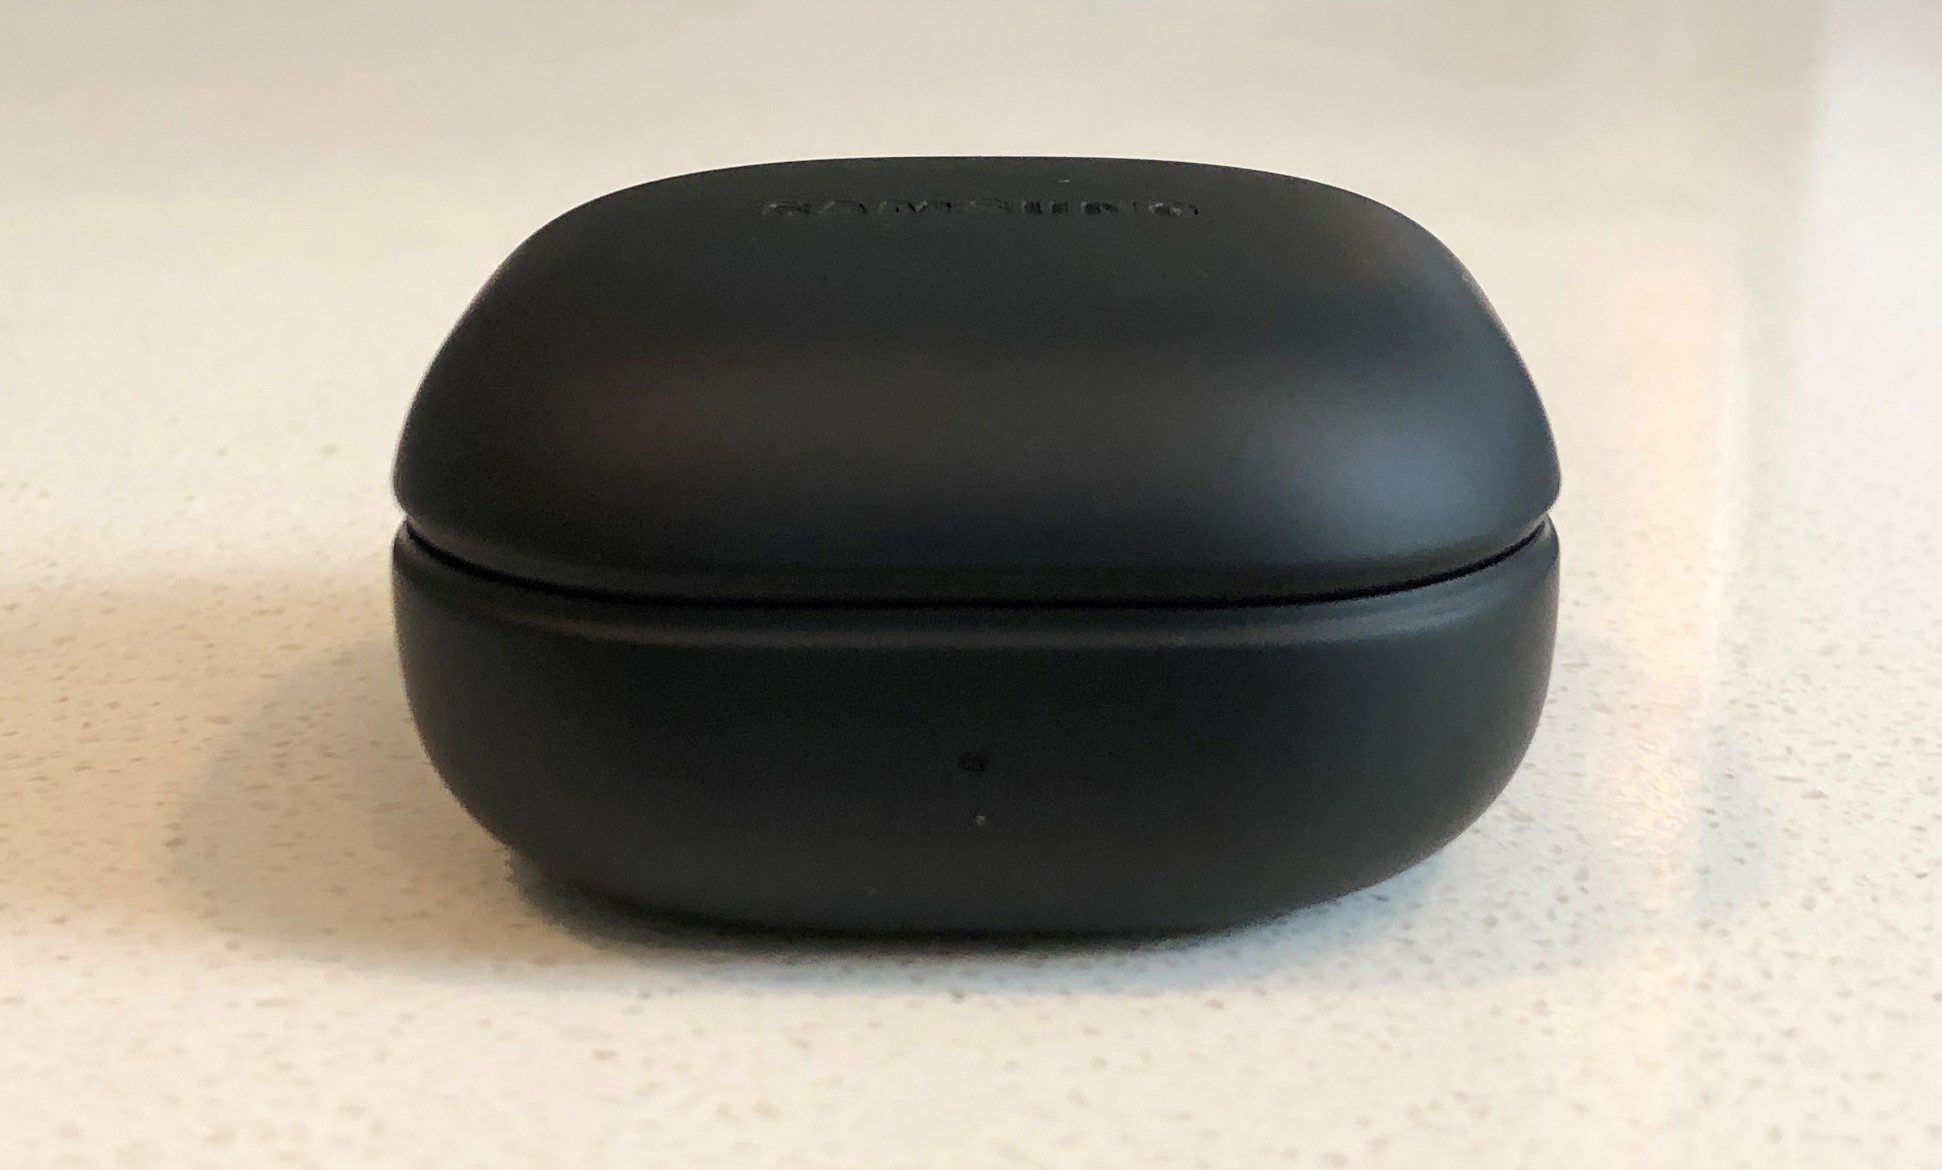 Samsung Galaxy Buds2 Pro charging and carrying case side